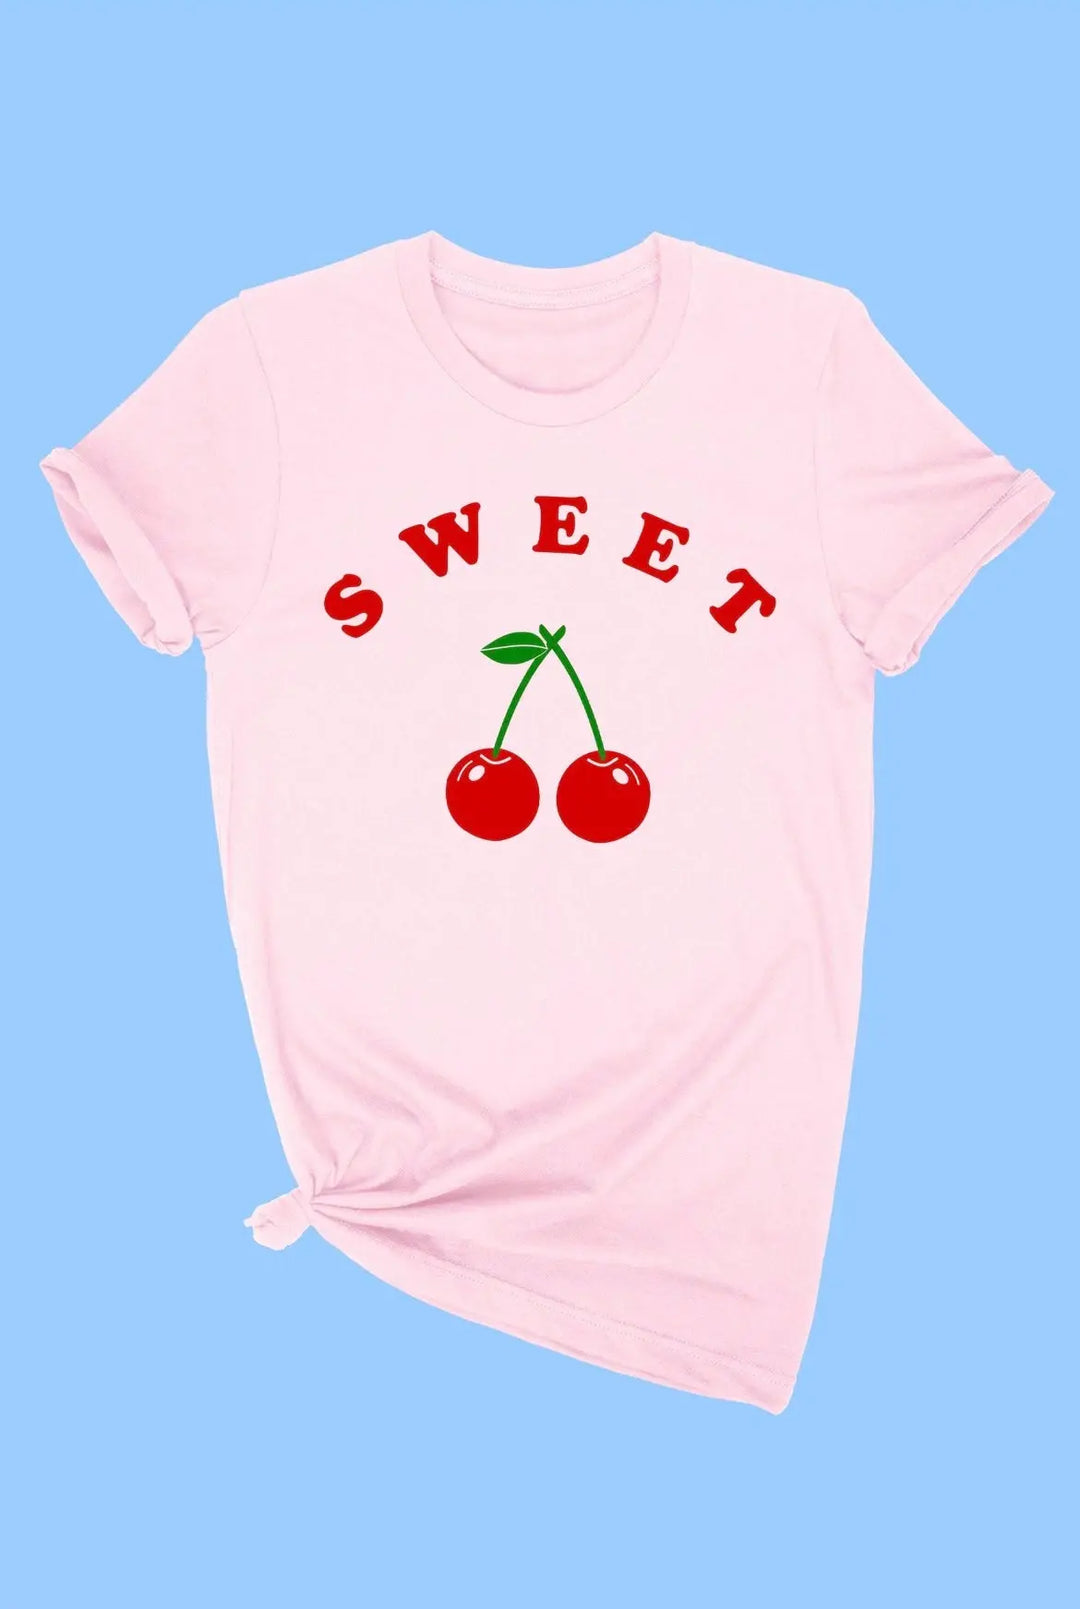 Sweet tee - SurgeStyle Boutique